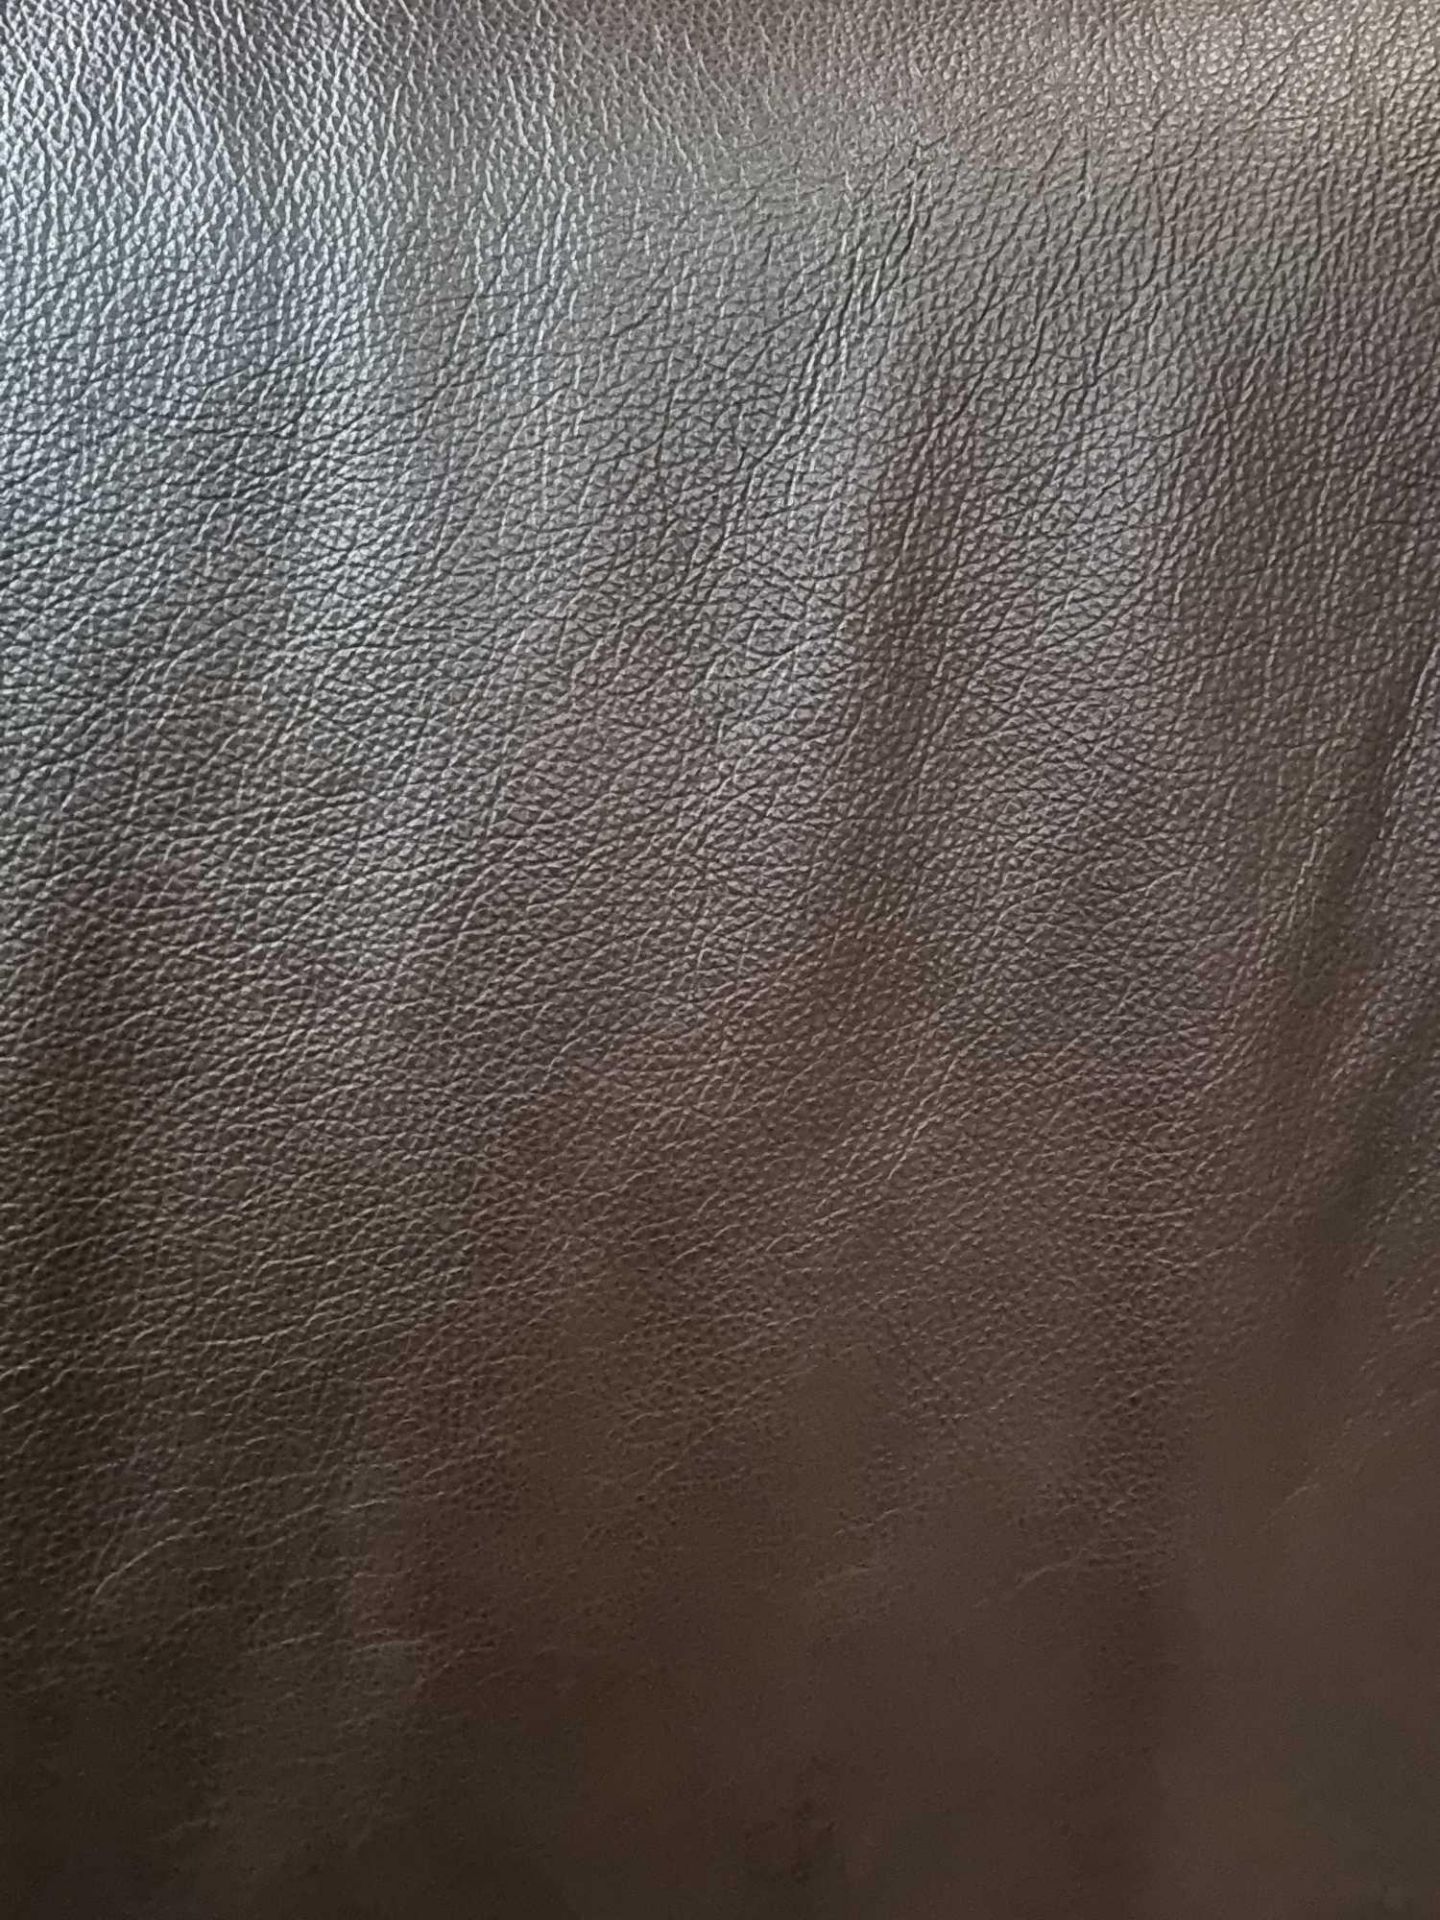 Mastrotto Hudson Chocolate Leather Hide approximately 3.2mÂ² 2 x 1.6cm - Image 2 of 2